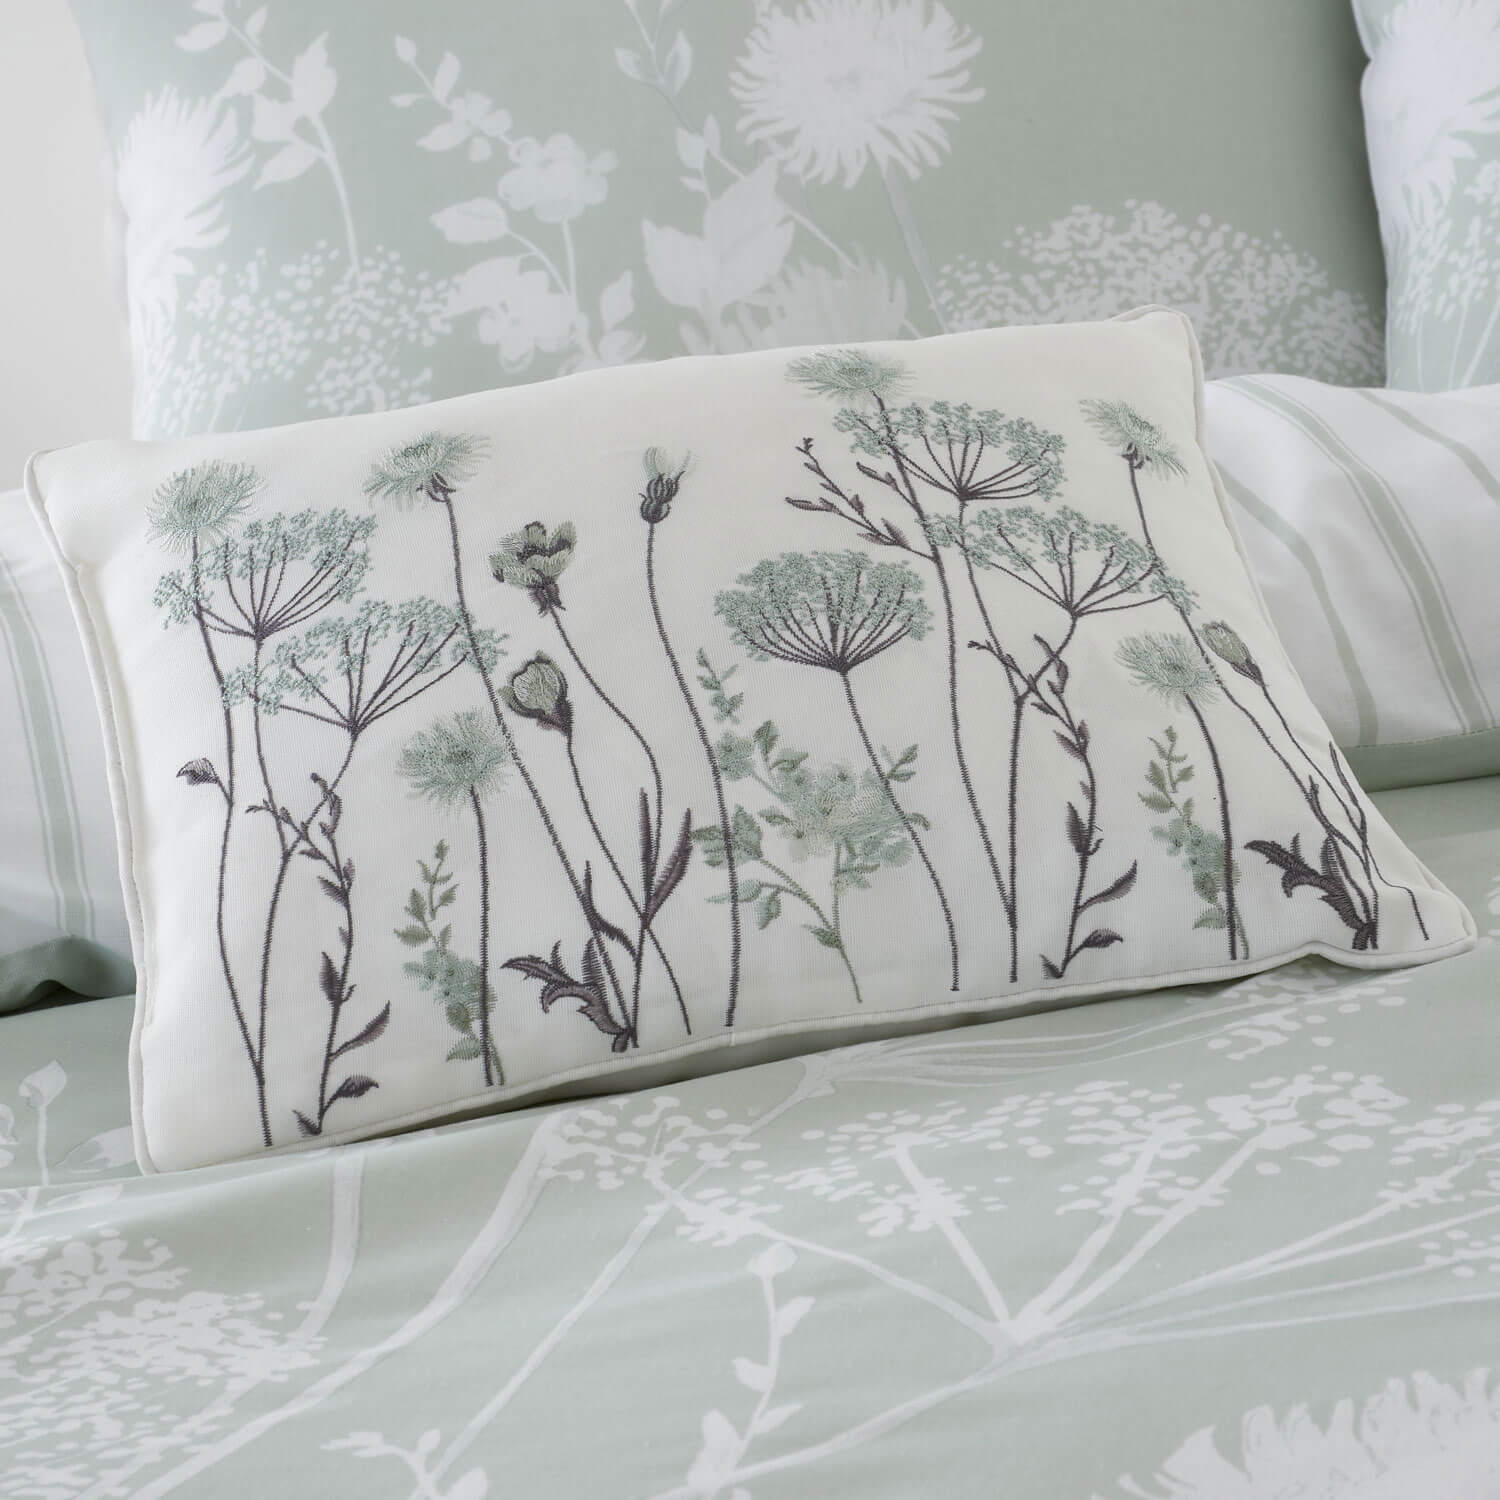  The Home Collection Meadowsweet Floral Duvet Cover Set - White/Green 3 Shaws Department Stores